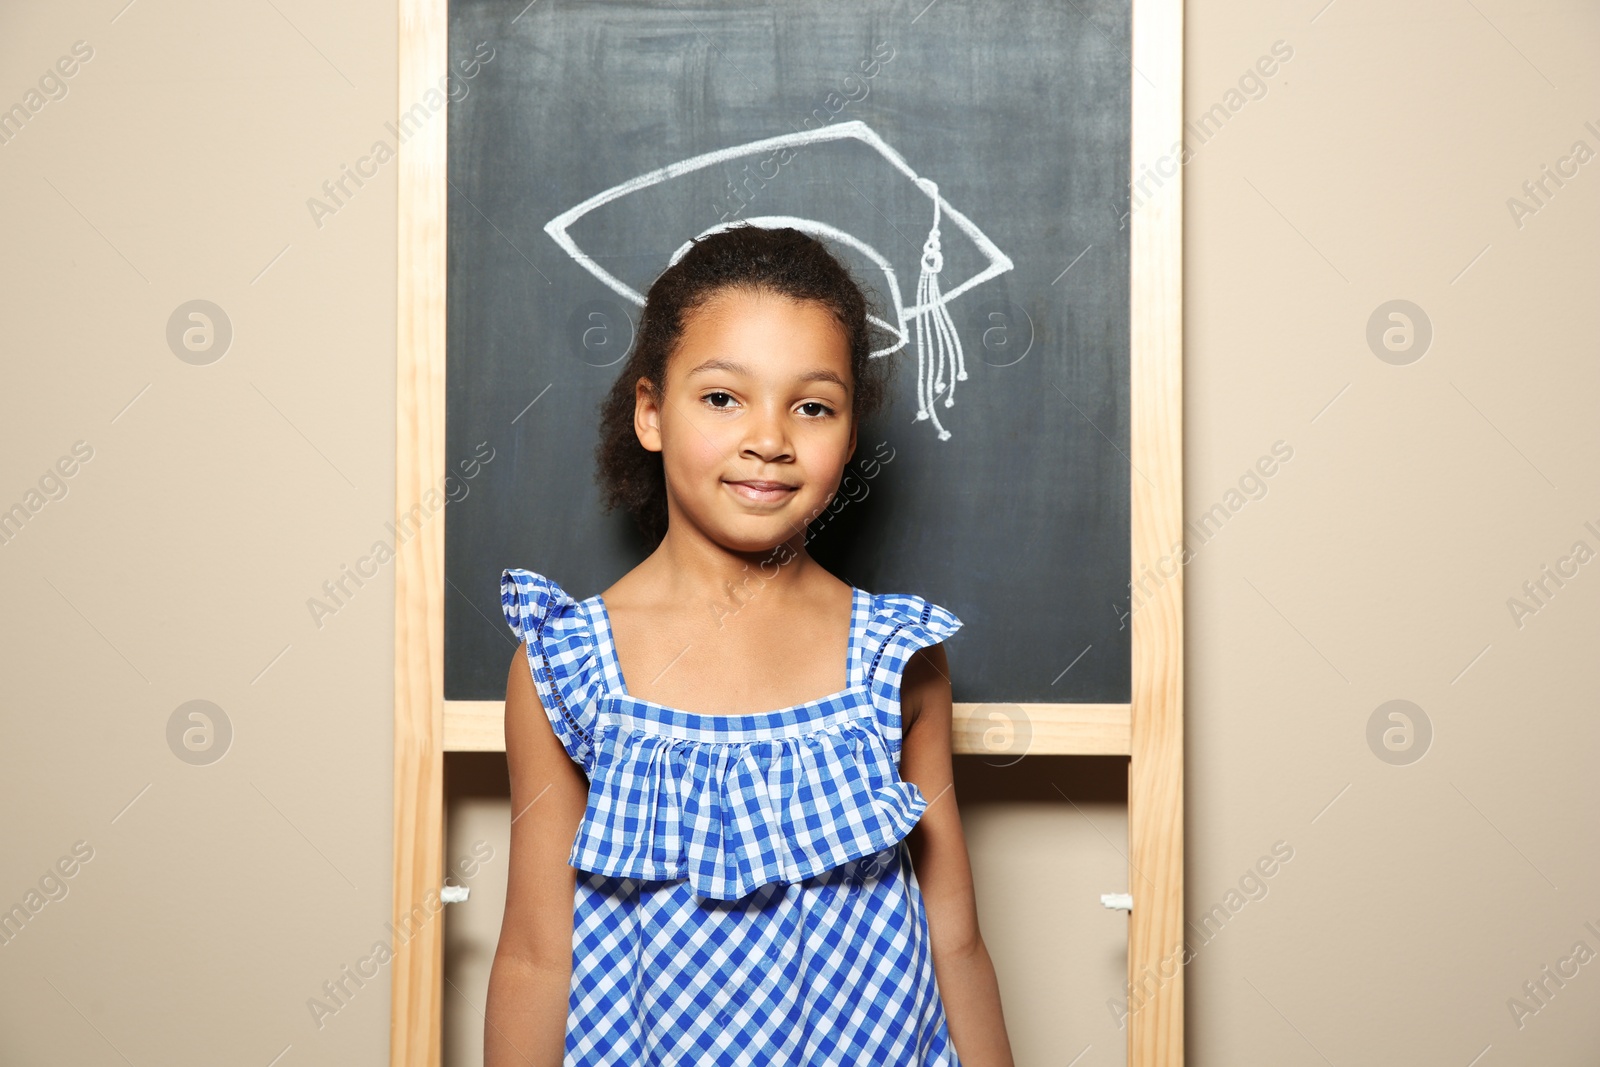 Photo of African-American child standing at blackboard with chalk drawn academic cap. Education concept